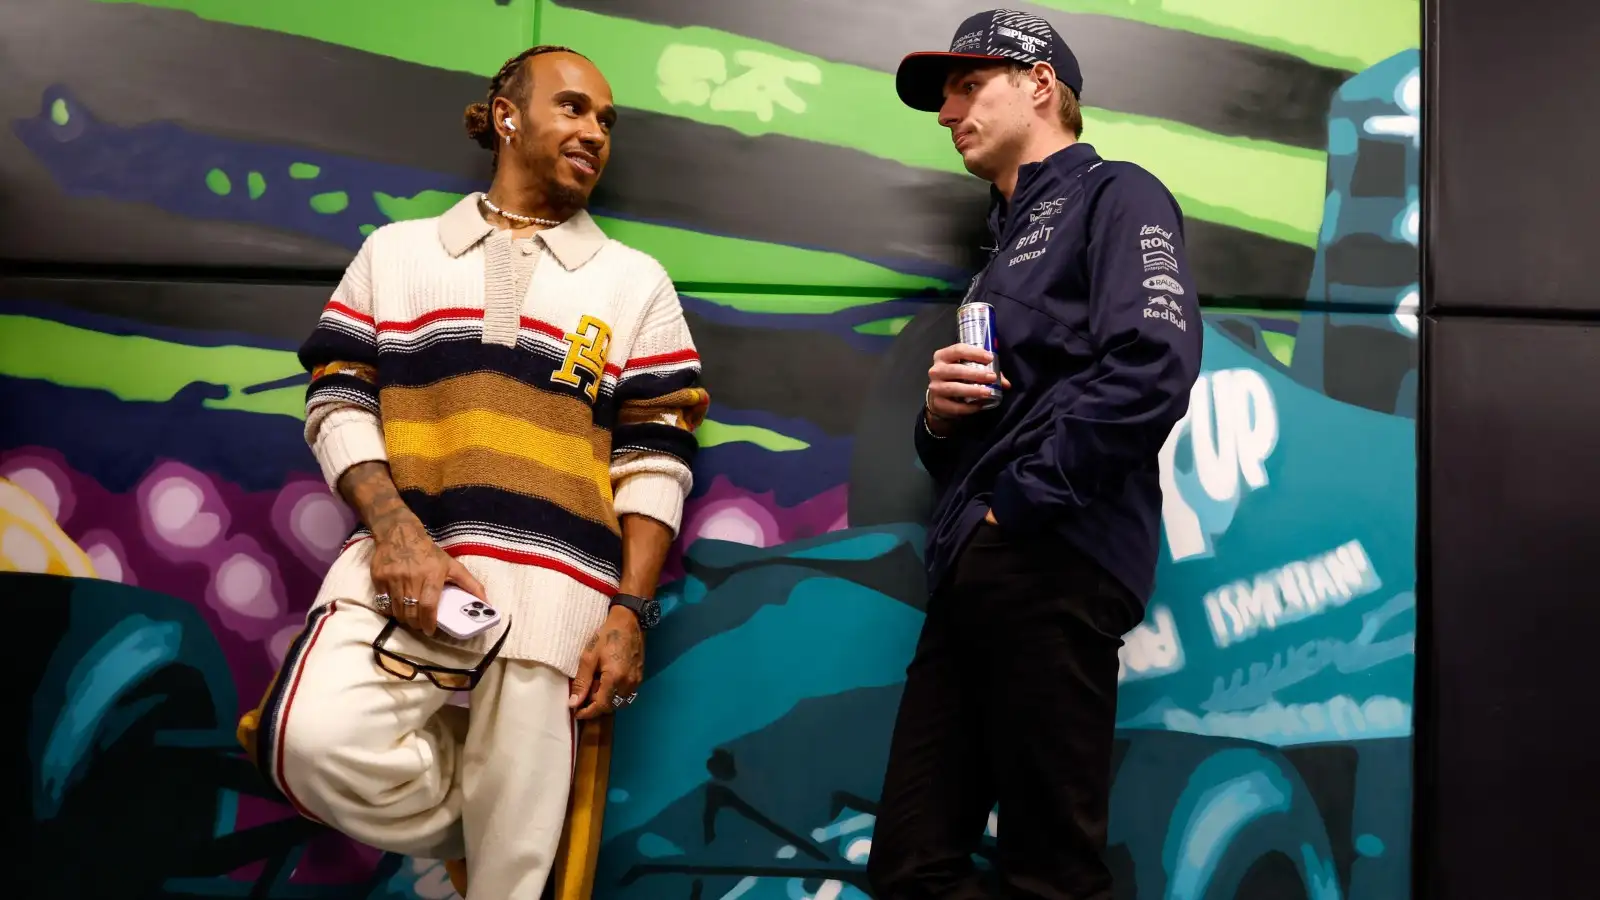 Lewis Hamilton and Max Verstappen have a chat in Las Vegas.